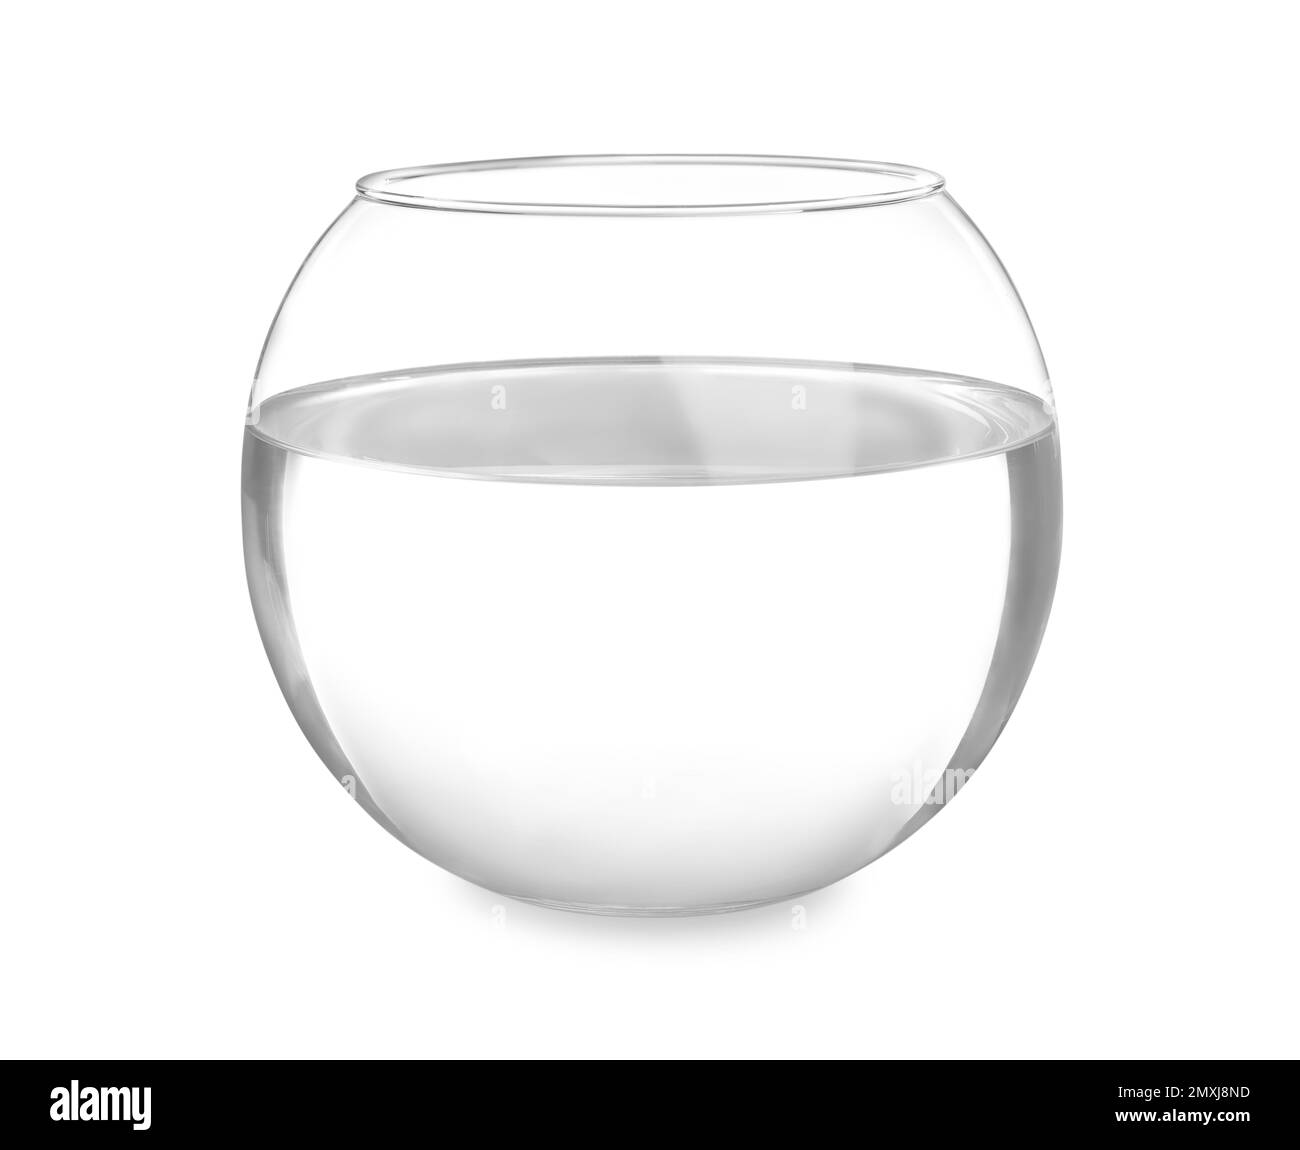 Flowing water on glass Black and White Stock Photos & Images - Alamy